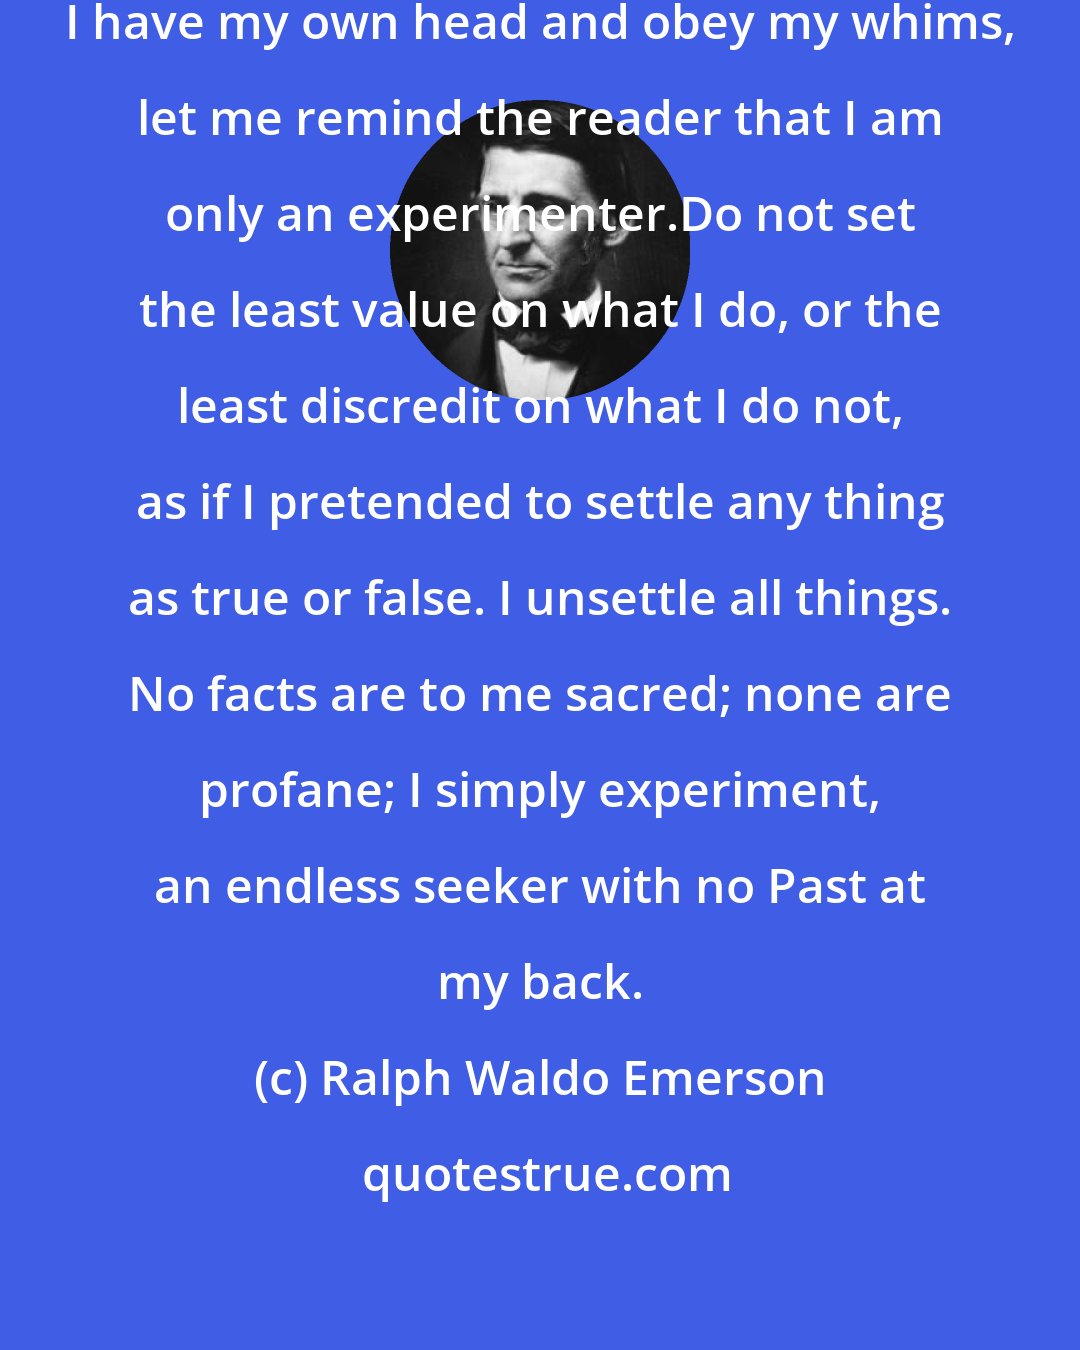 Ralph Waldo Emerson: But lest I should mislead any when I have my own head and obey my whims, let me remind the reader that I am only an experimenter.Do not set the least value on what I do, or the least discredit on what I do not, as if I pretended to settle any thing as true or false. I unsettle all things. No facts are to me sacred; none are profane; I simply experiment, an endless seeker with no Past at my back.